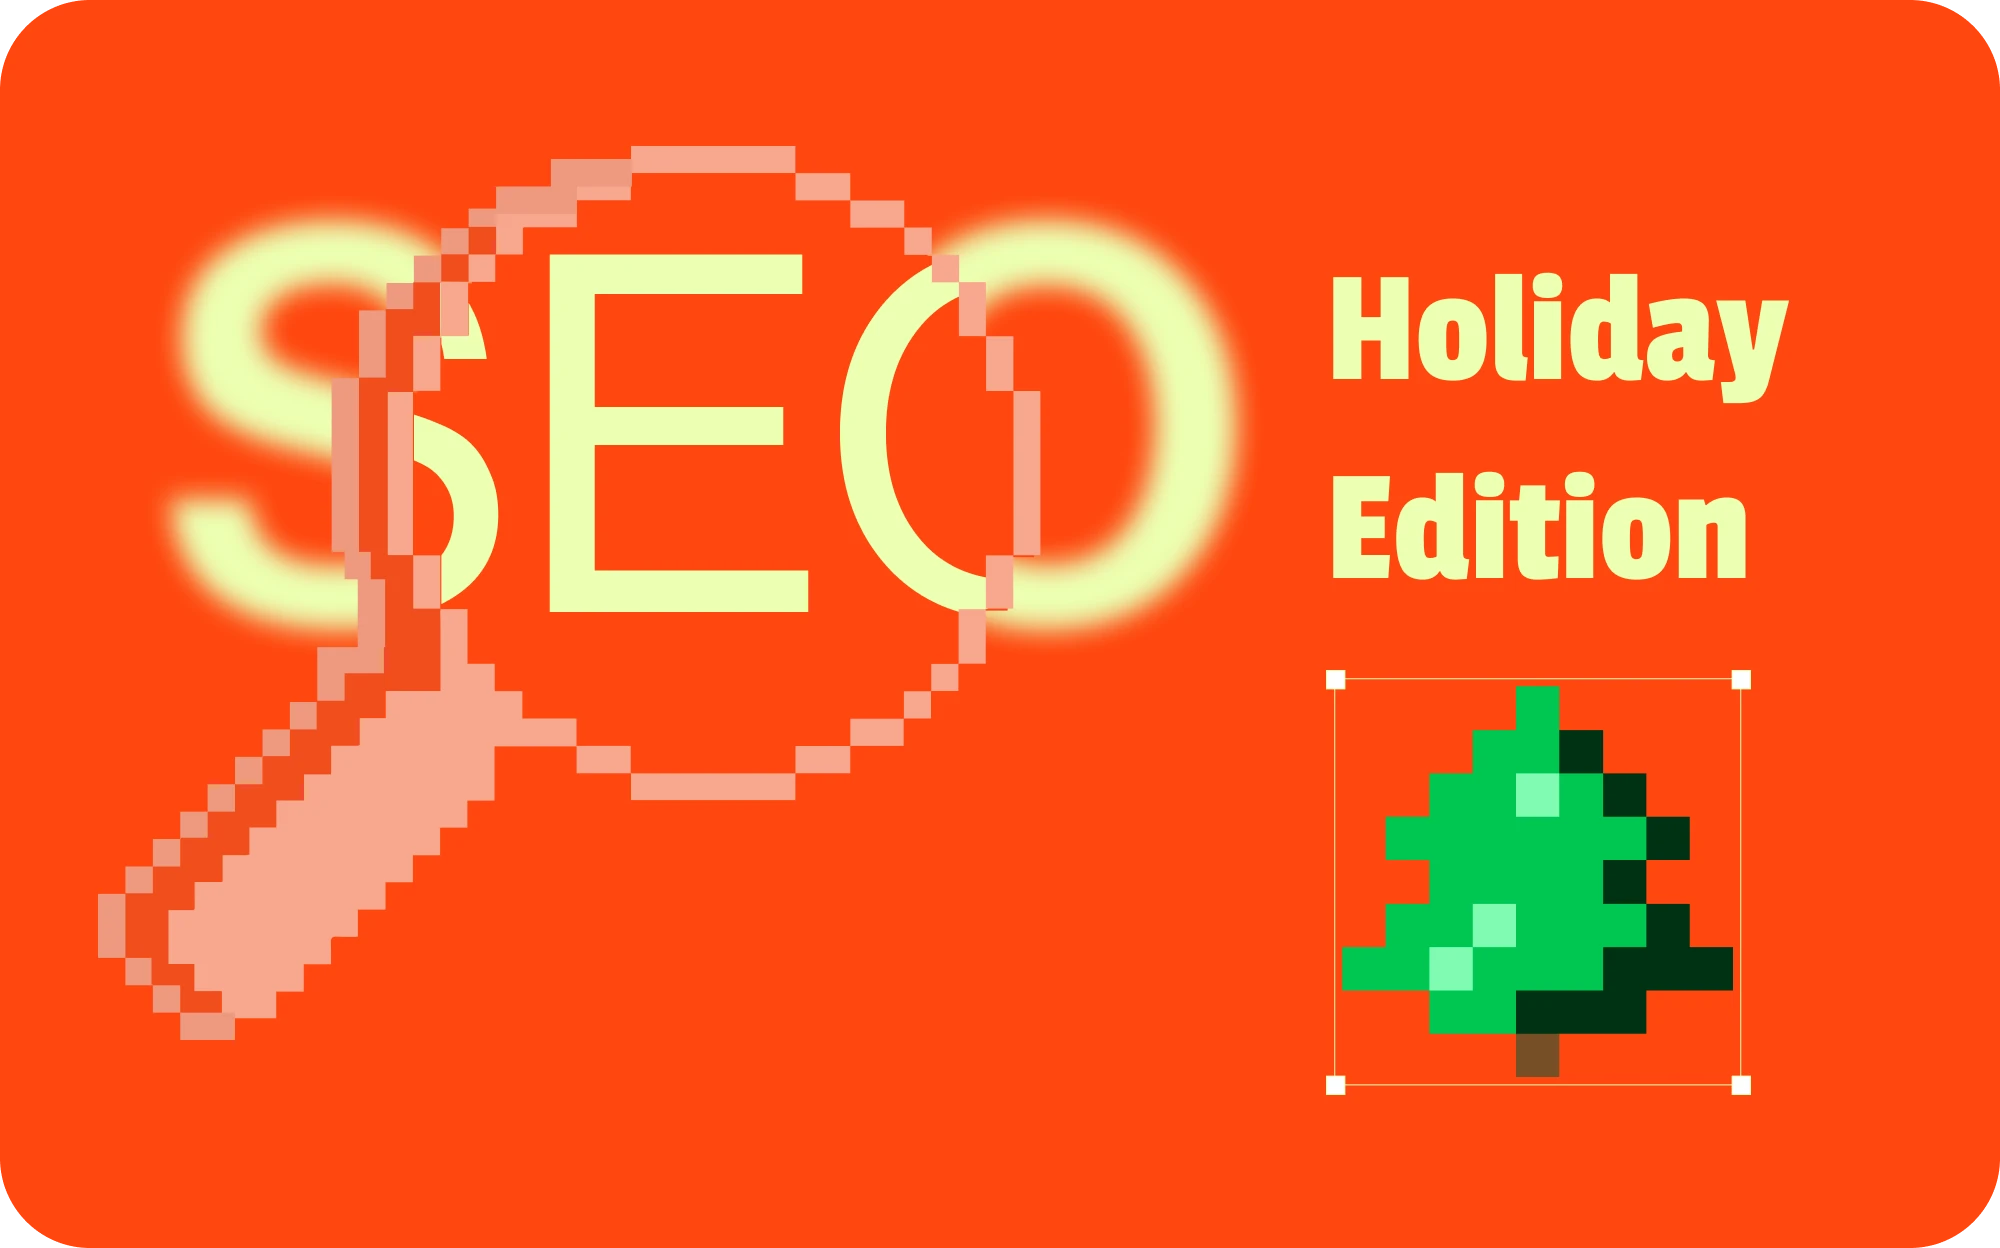 How to Prepare Your Website SEO for the Holiday Season